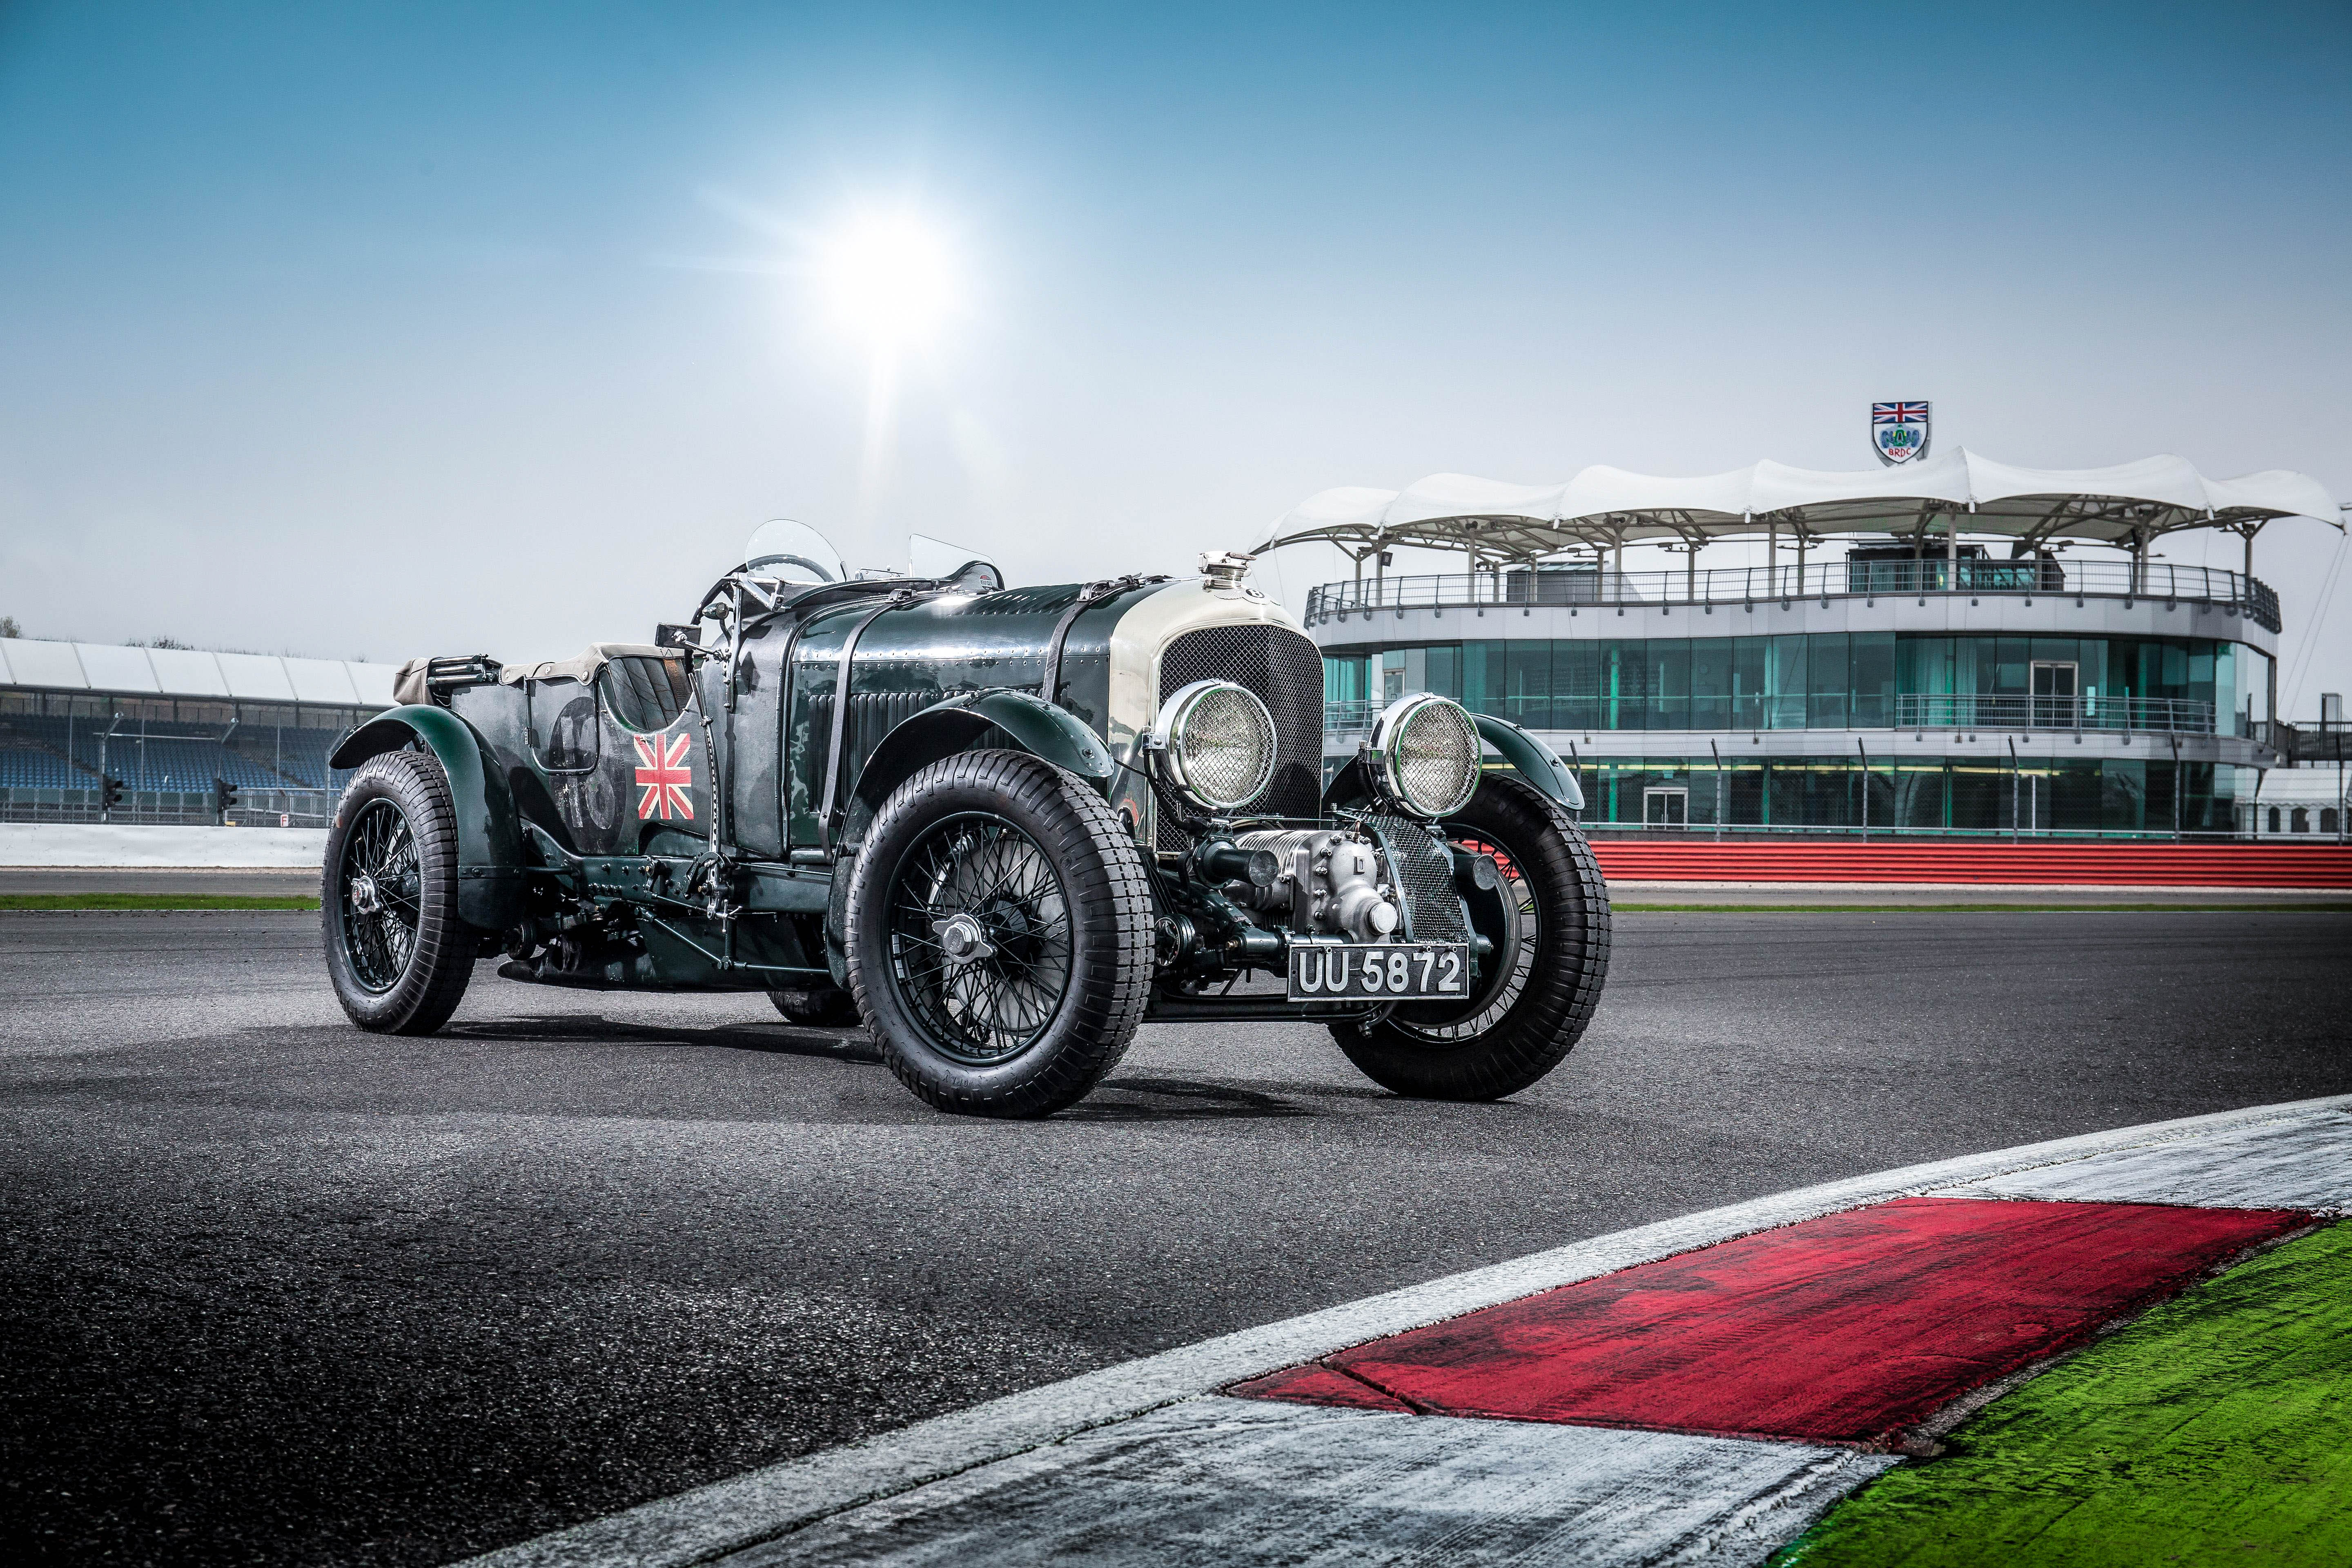 Bentley's Blower is an iconic performance car